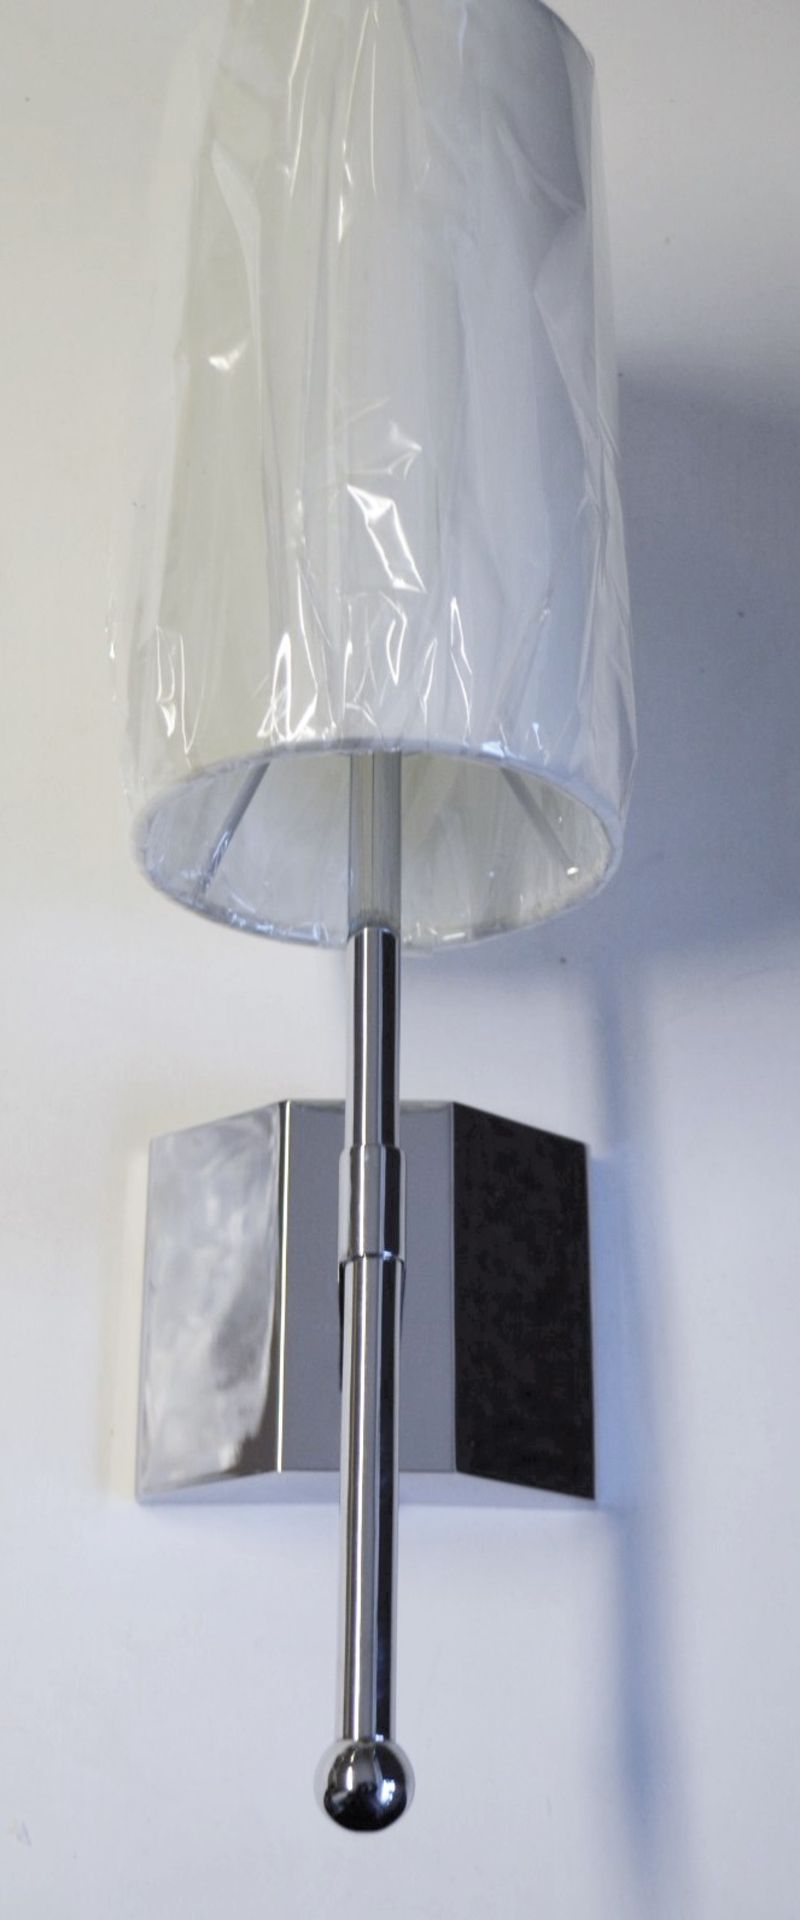 1 x CHELSOM Wall Light In A Chrome Finish With A Silk Shade - Unused Boxed Stock - Dimensions: - Image 5 of 5